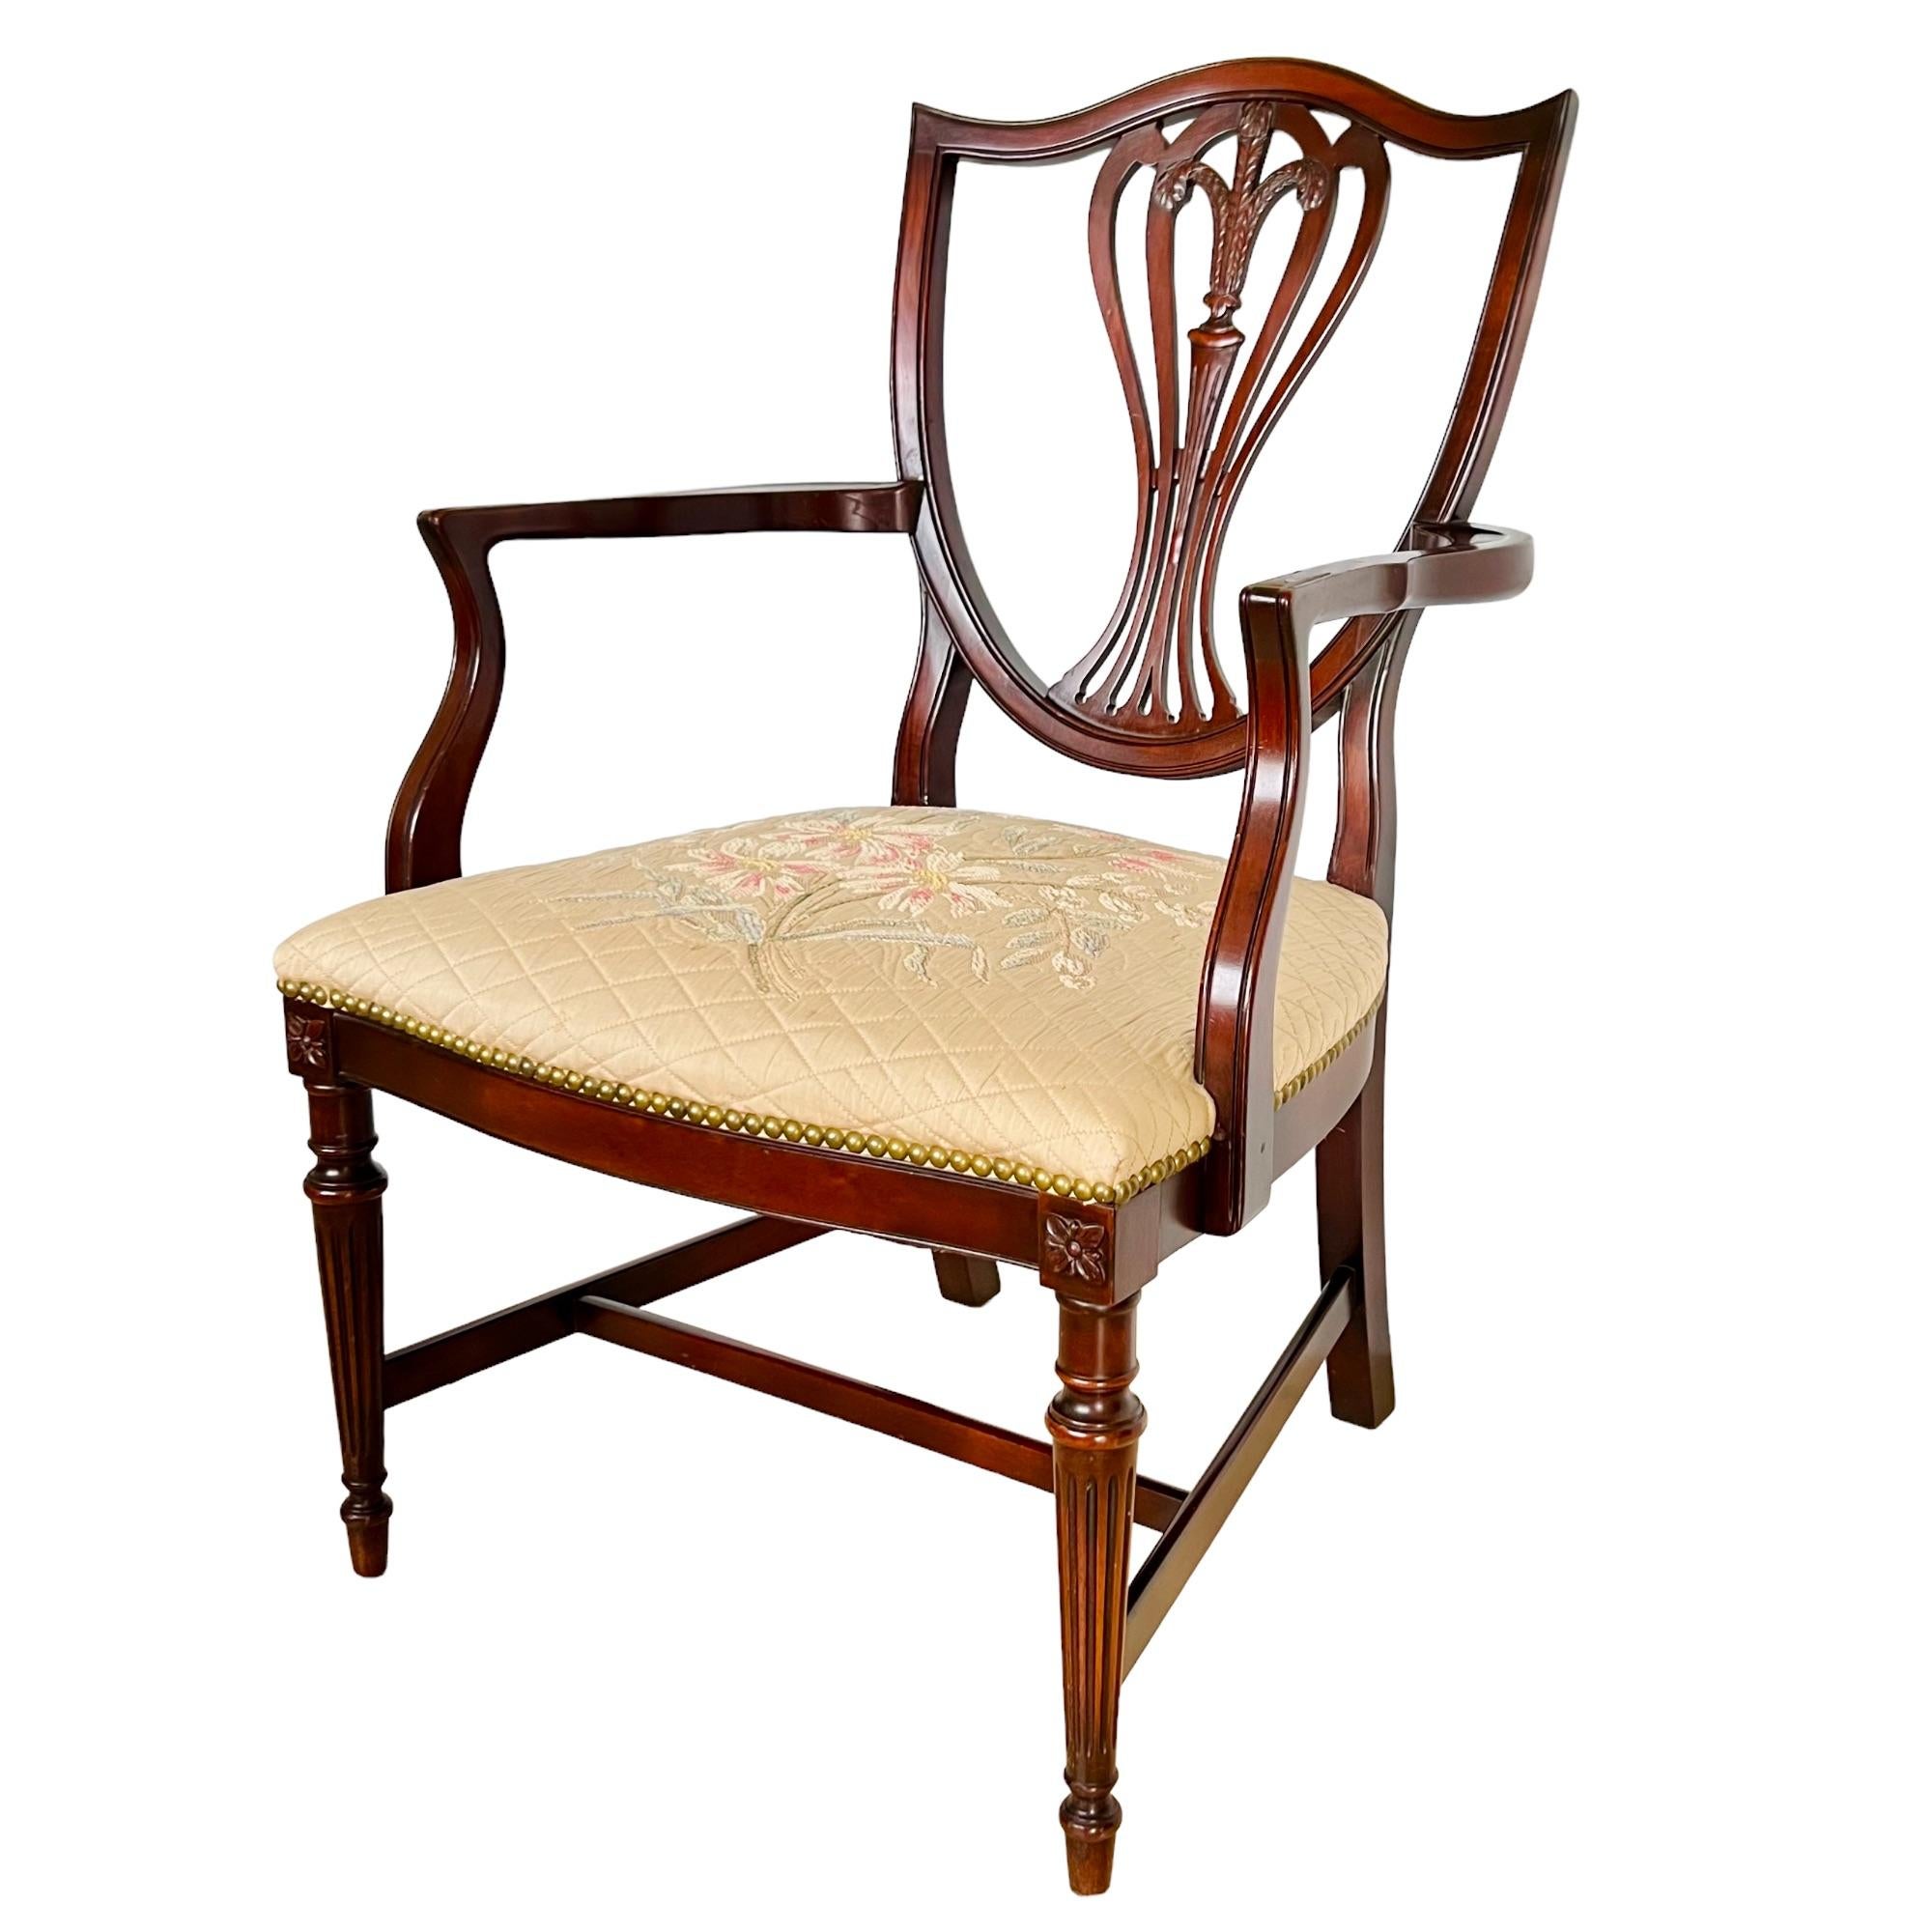 A George III style decorative mahogany armchair by Grand Ledge Chair Co. circa 1945. Sheraton design featuring a carved shield back, tapered fluted front legs and channeled arm & back detail. Hand stitched diamond quilted tan beige fabric seat with